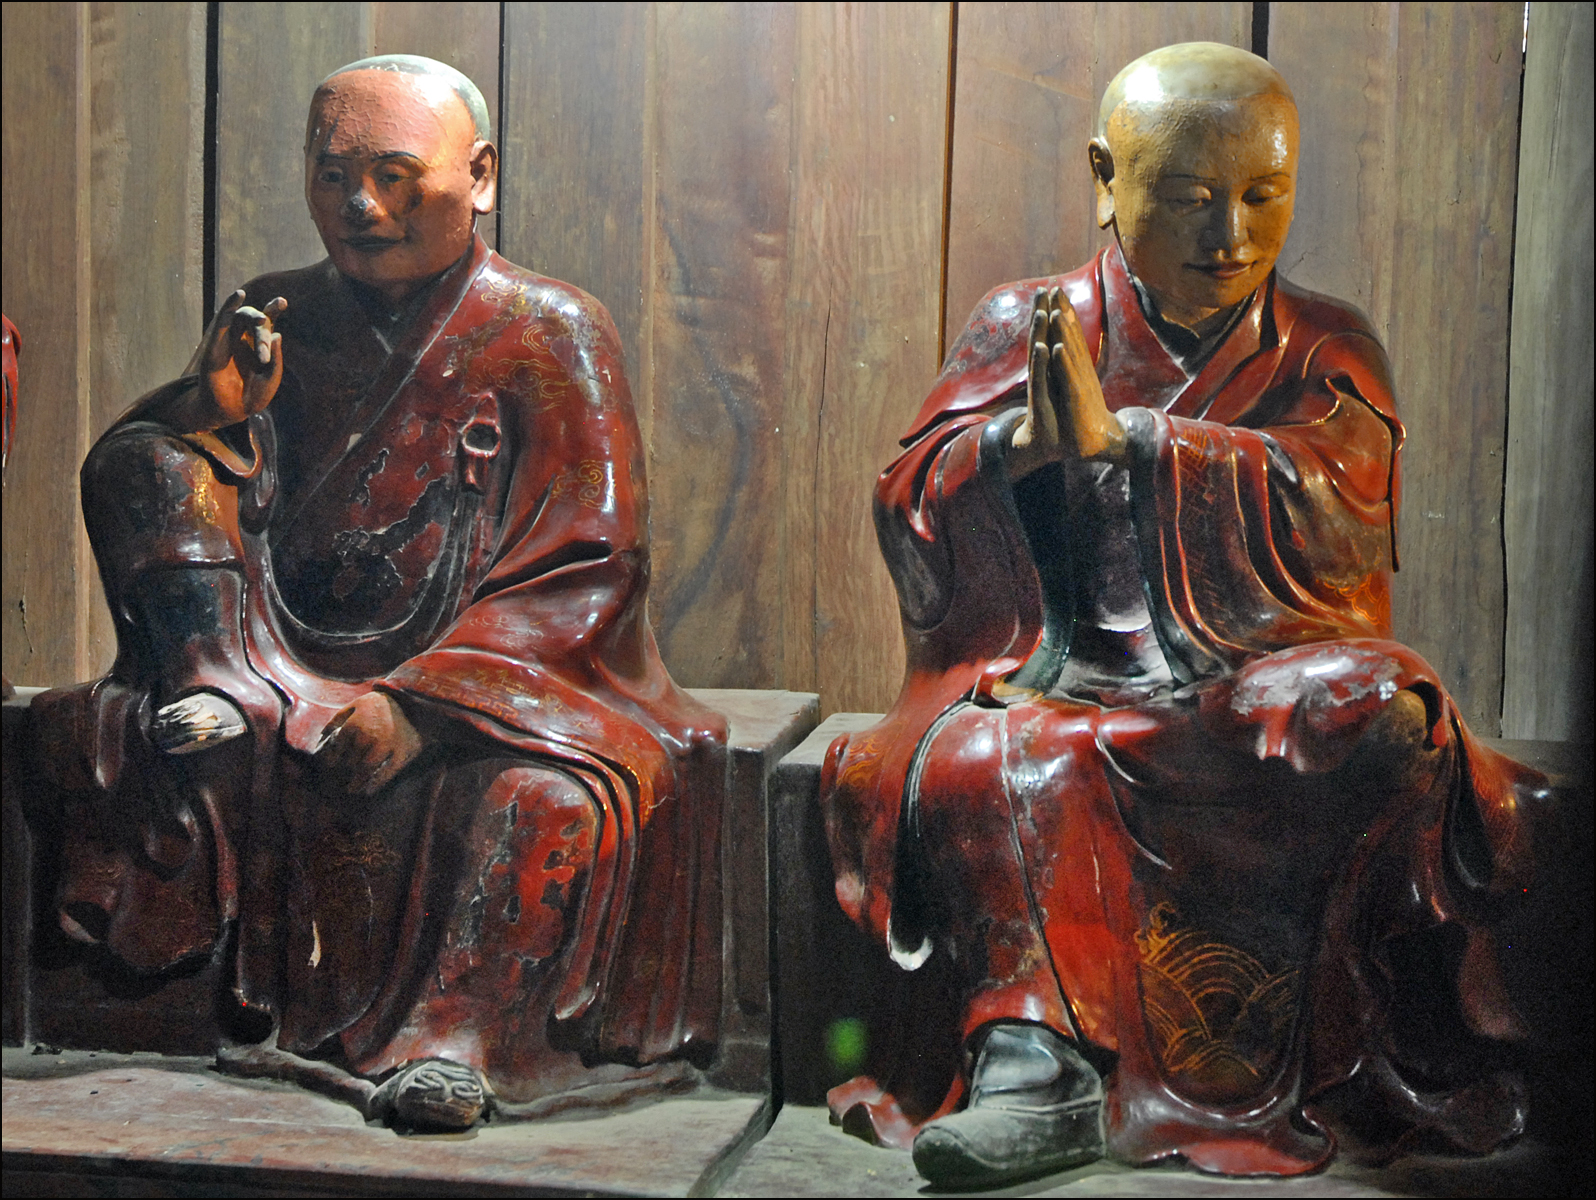 two statues of monks are sitting in front of wooden planks